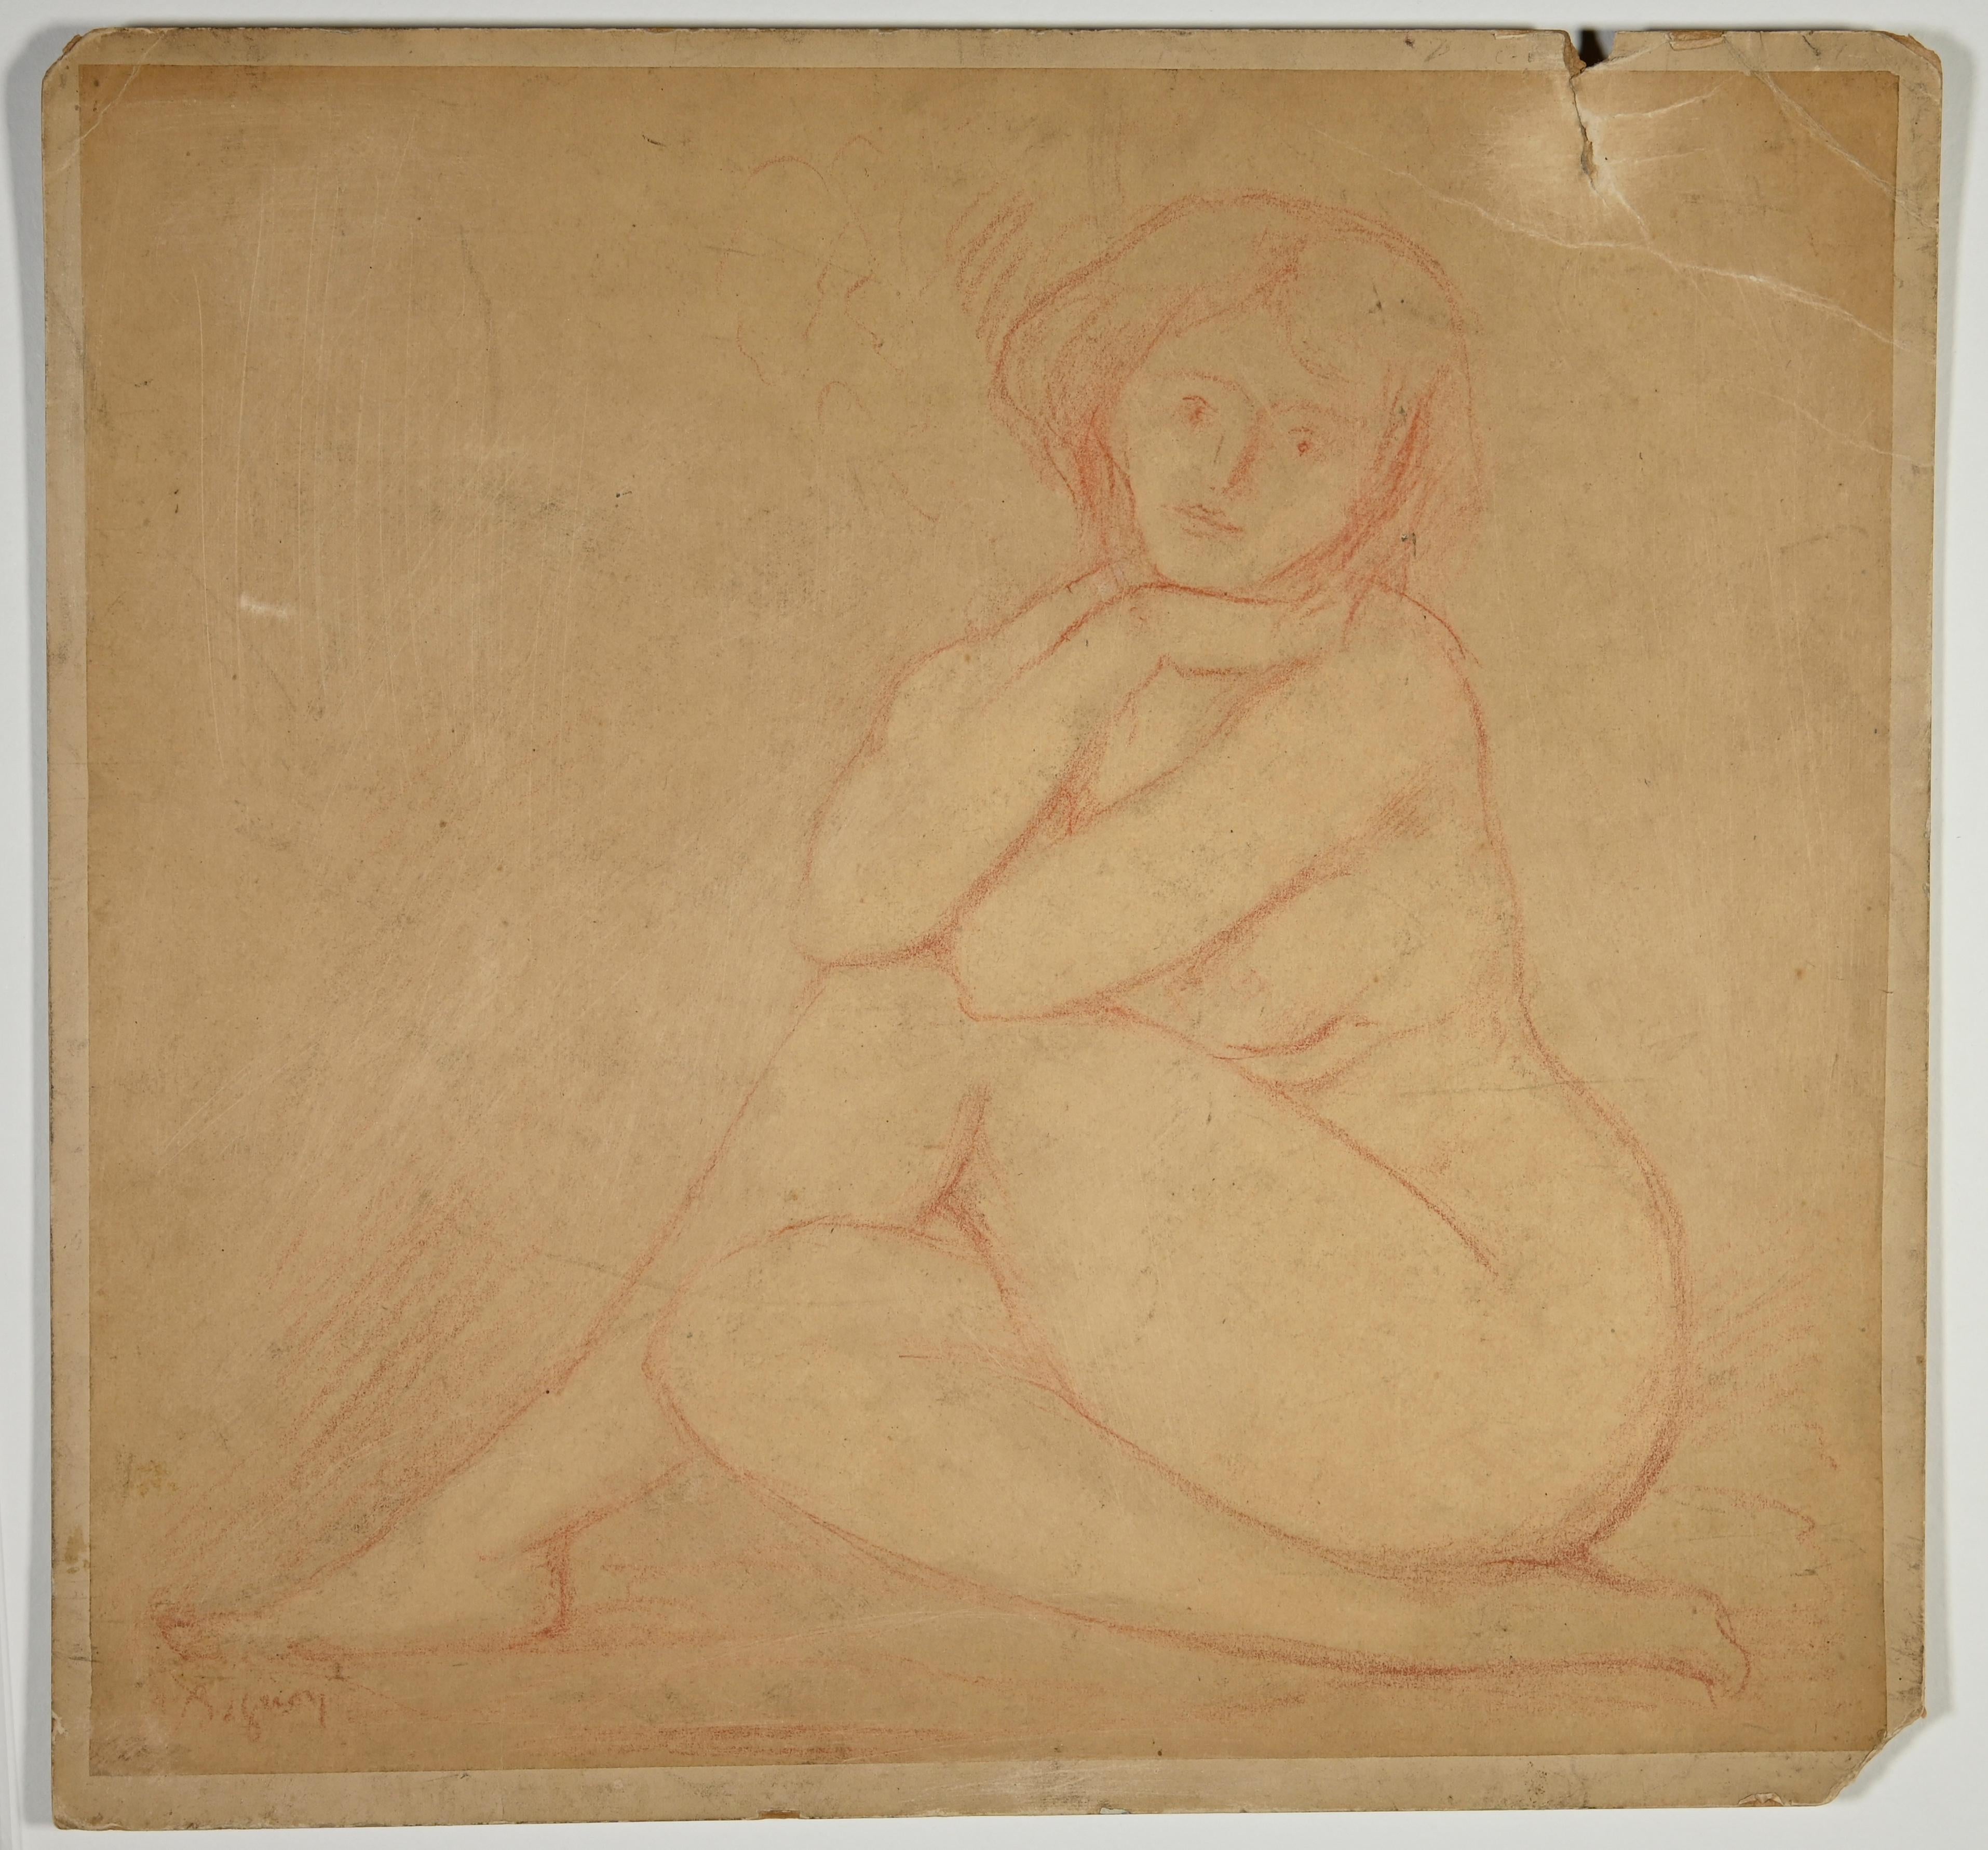 Nude of Woman is an artwok realized by the French Artist Emile André Leroy.

Pastel Drawing on paper. Hand Signed in the left margin.

Good conditions except fo a small tear in the right edge of paper.

Emile André Leroy (1899-1953).He was a French